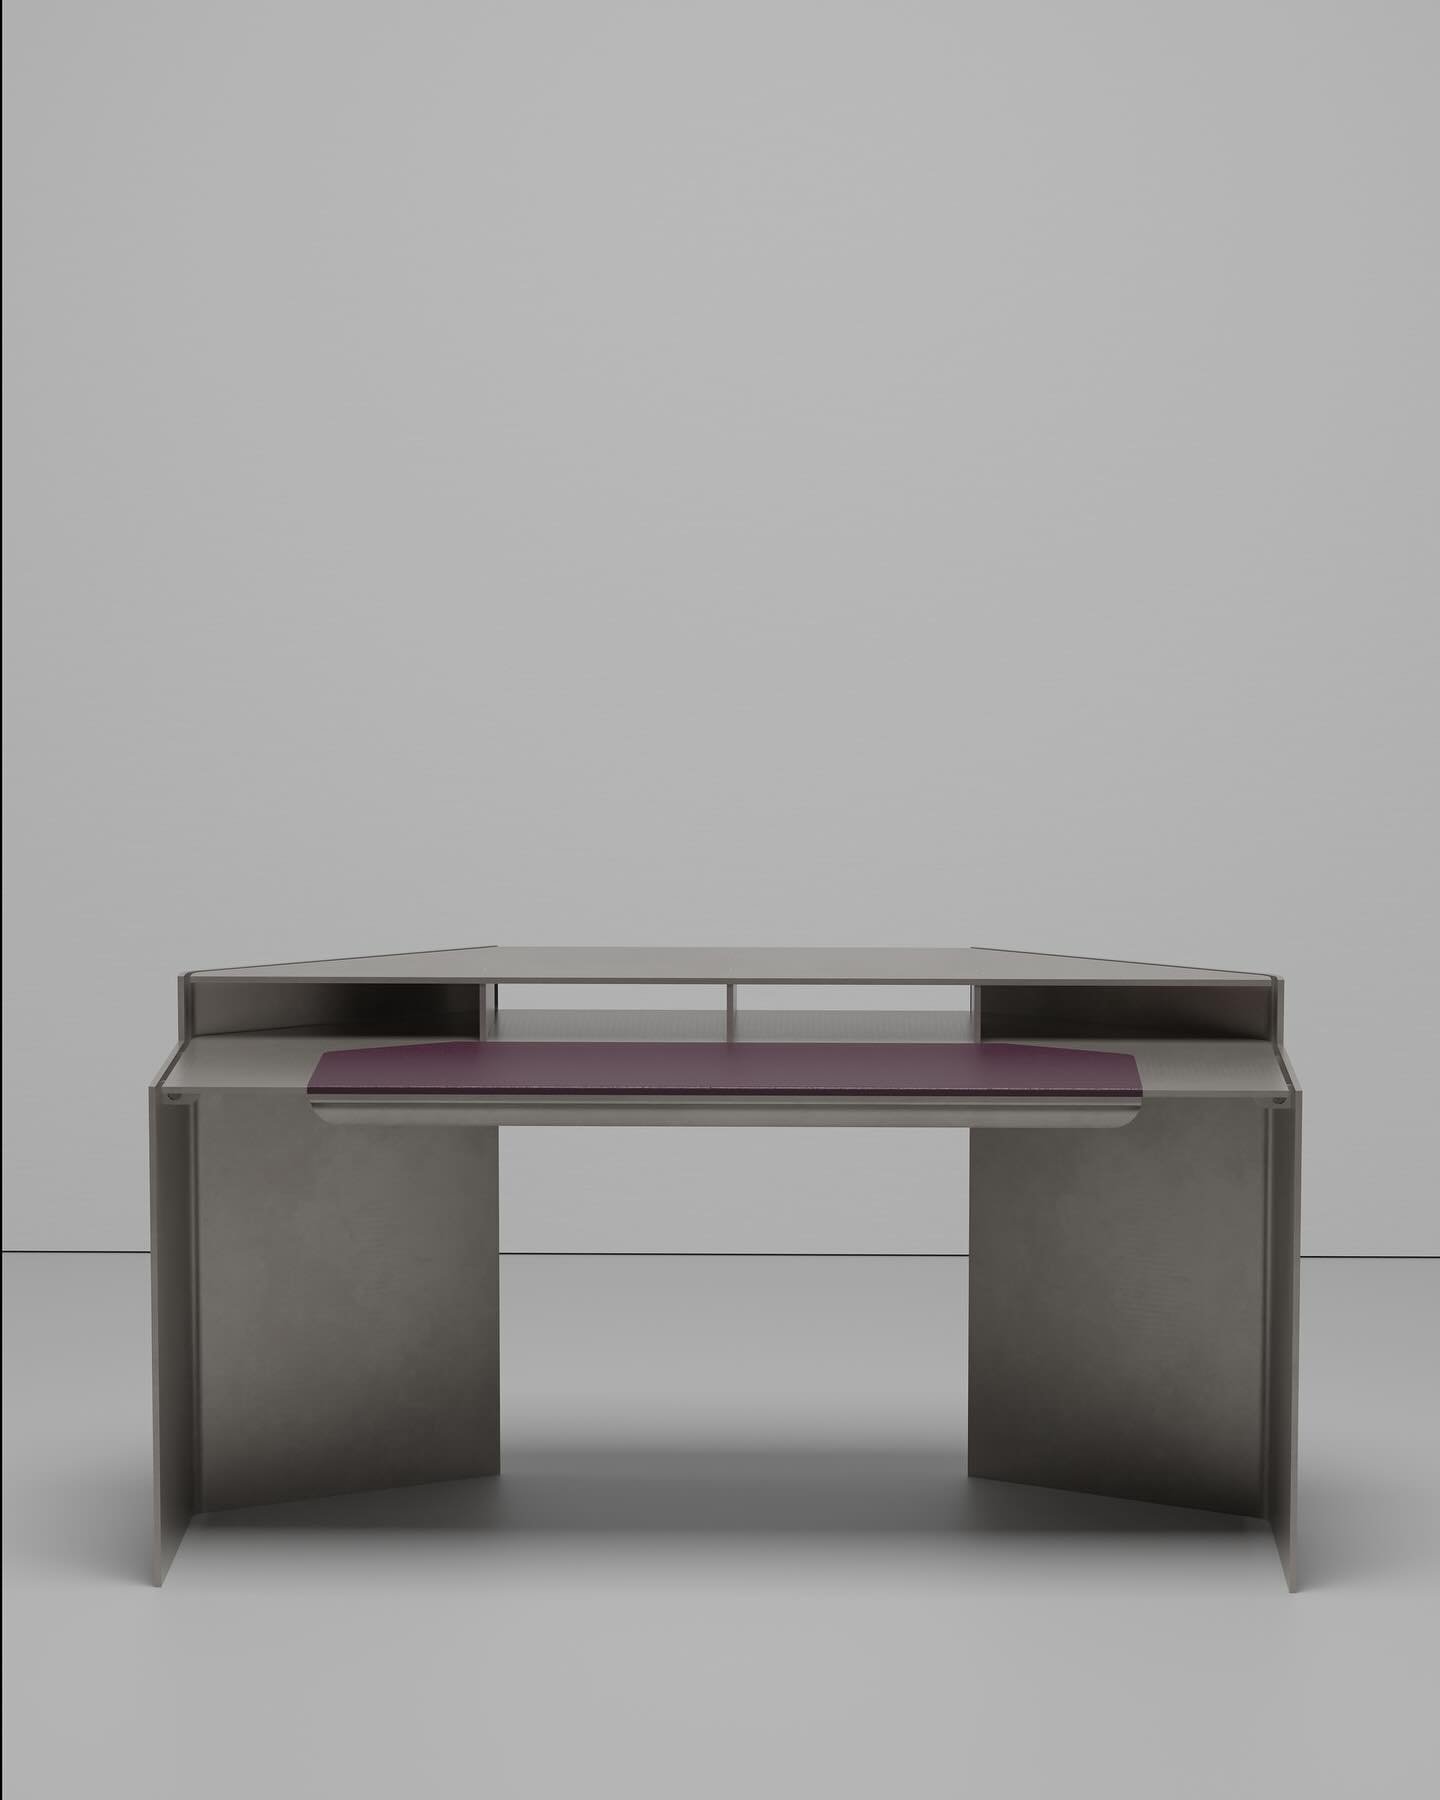 Next General Desk in 3/8 aluminum and leather. A 3/8&rdquo; gap lies in between the bent legs and the top for cord management and minimal bent-aluminum drawer lined in leather tucks under the top. Designed for friends @tameramunch &amp; @mjhowells. F